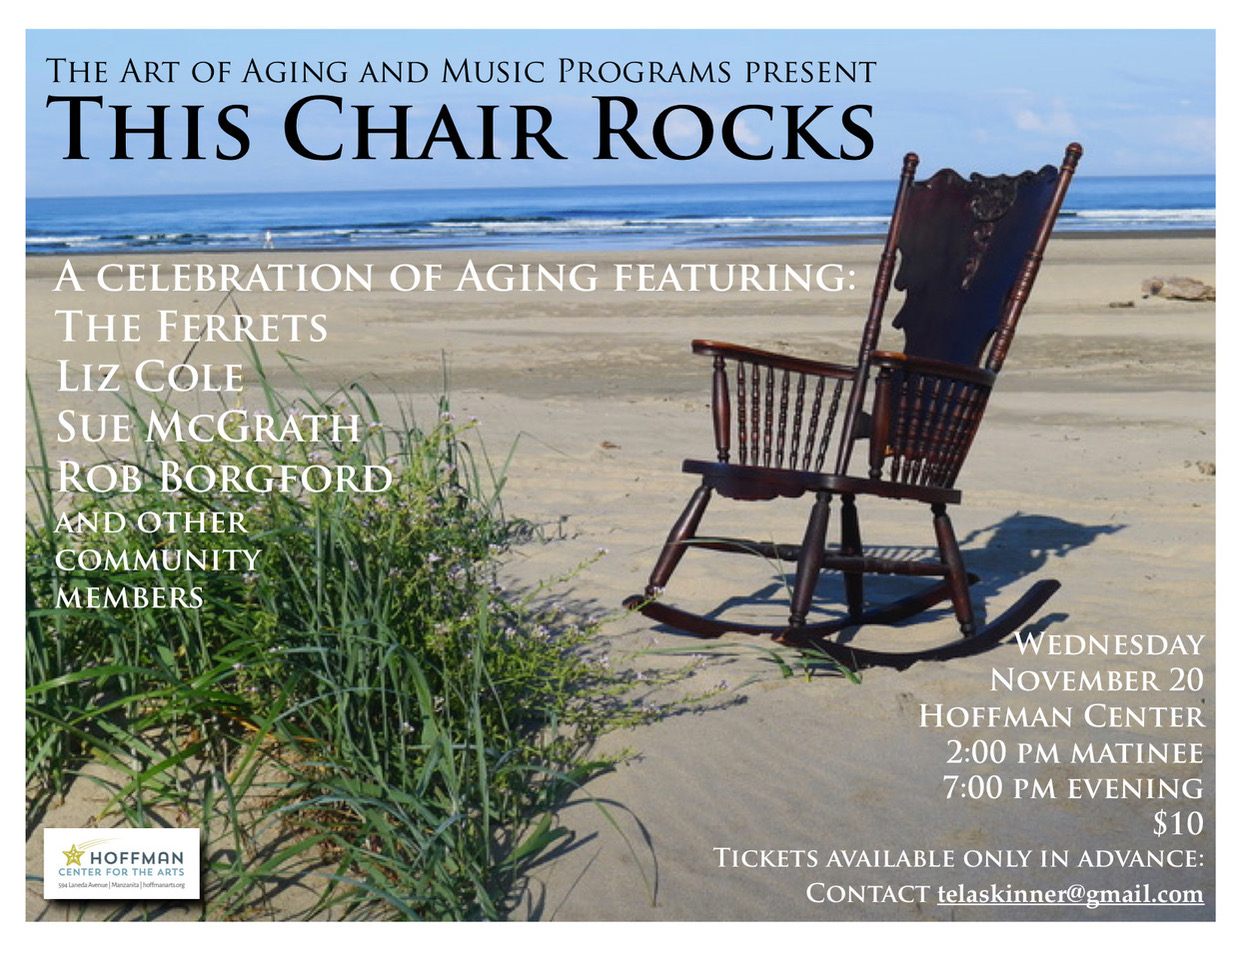 This Chair Rocks: A Celebration of Music and Aging Nov. 20th at Hoffman